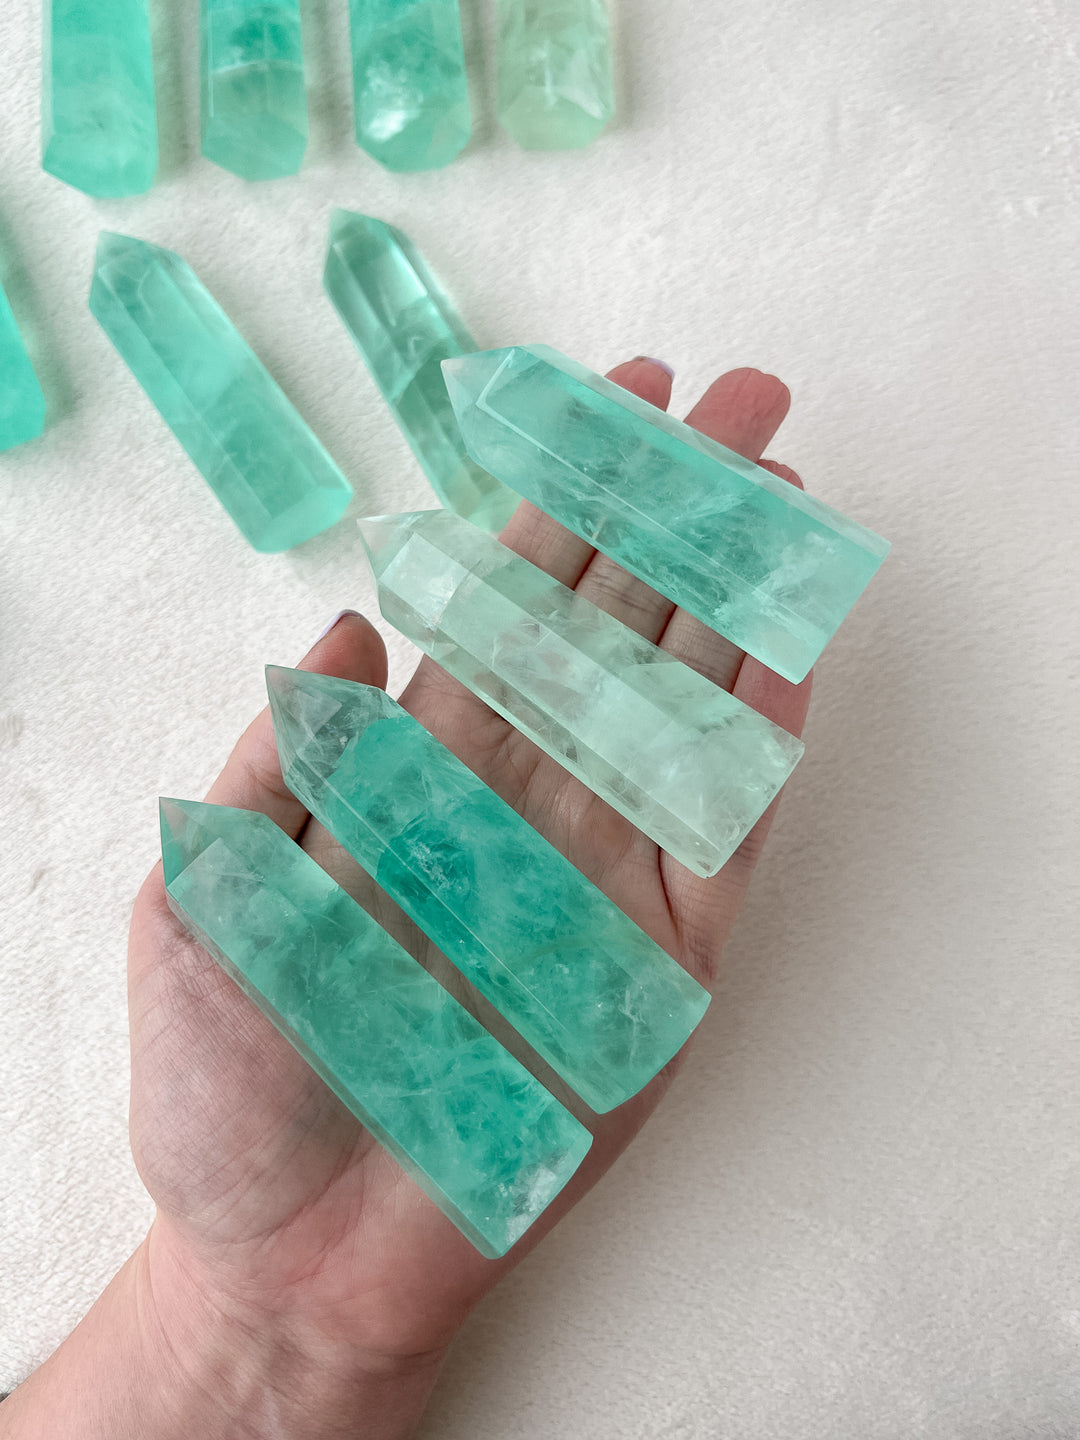 Sea Green Fluorite Tower // Focus + Encourages Growth